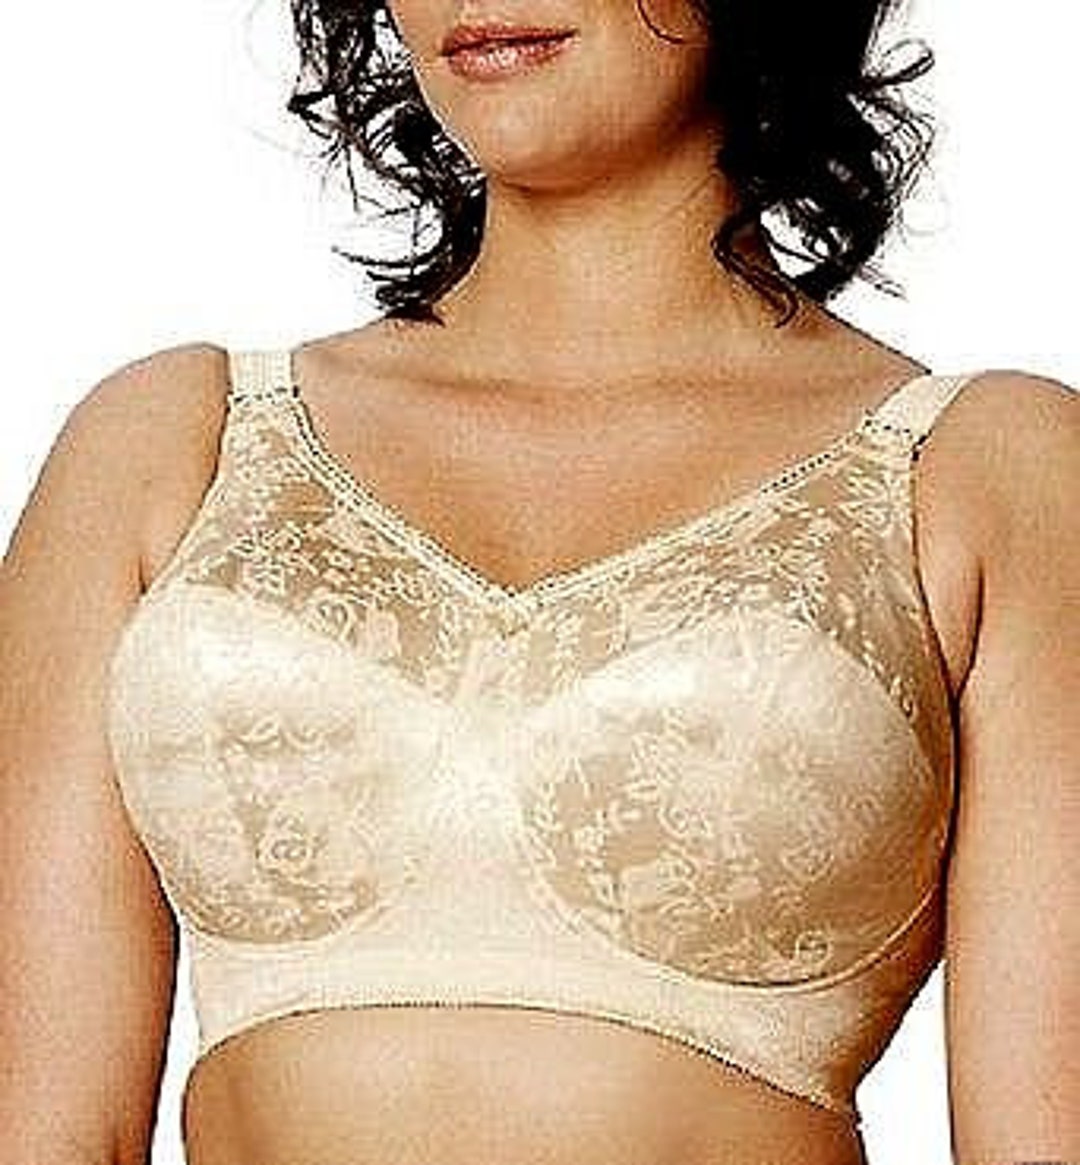 Vintage New Bali Double Support Full Support Soft Cup Bra Snow White 40D -   Australia